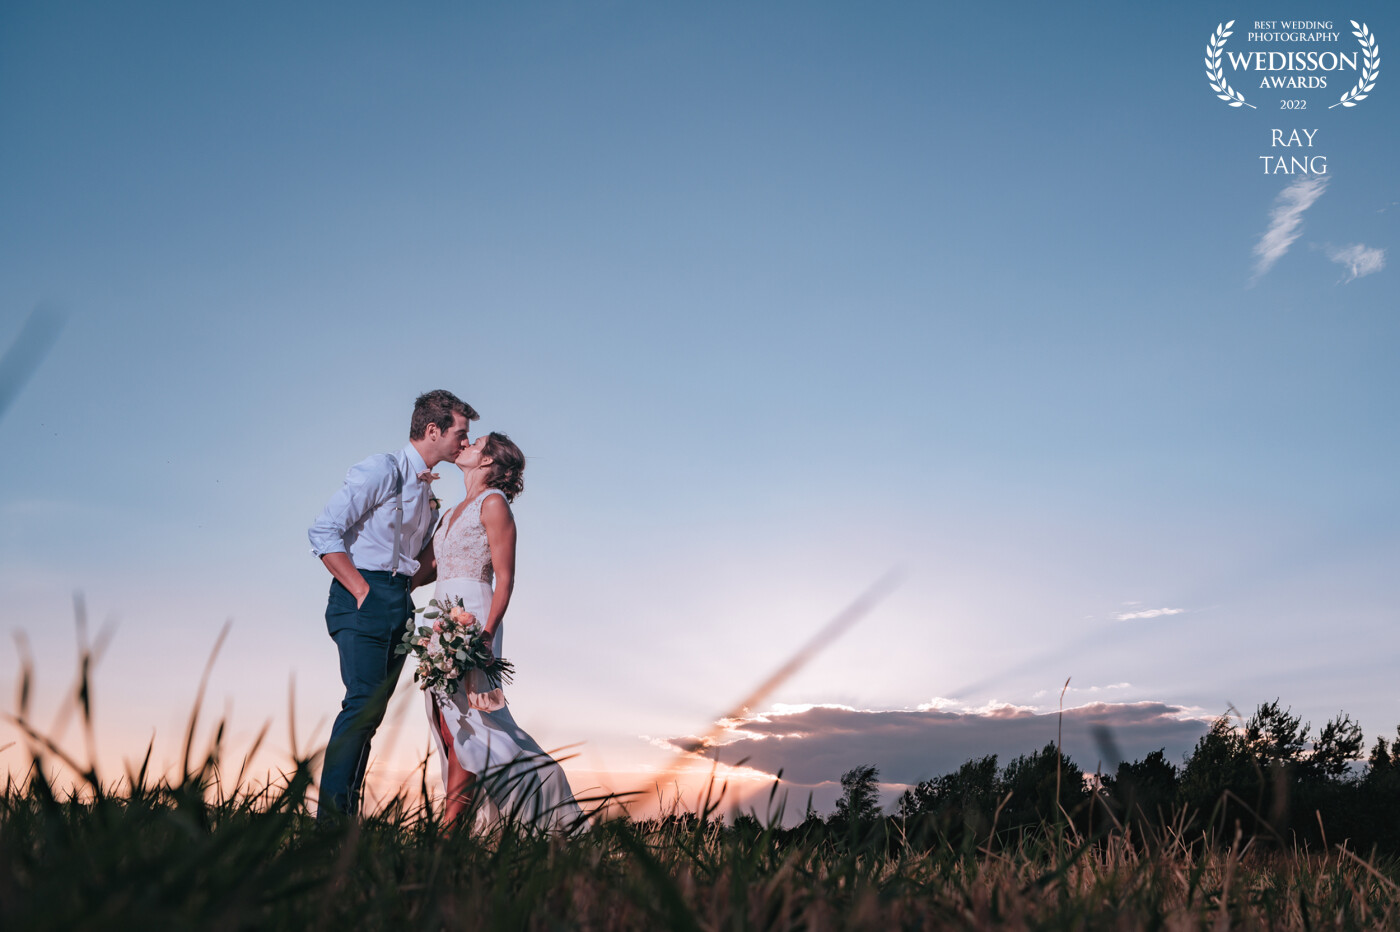 This was one of the last images from Sarah & Pax's chillax wedding,  the day has been beautiful  throughout and to finish off,  I just had to grab this shot before the sun sets.